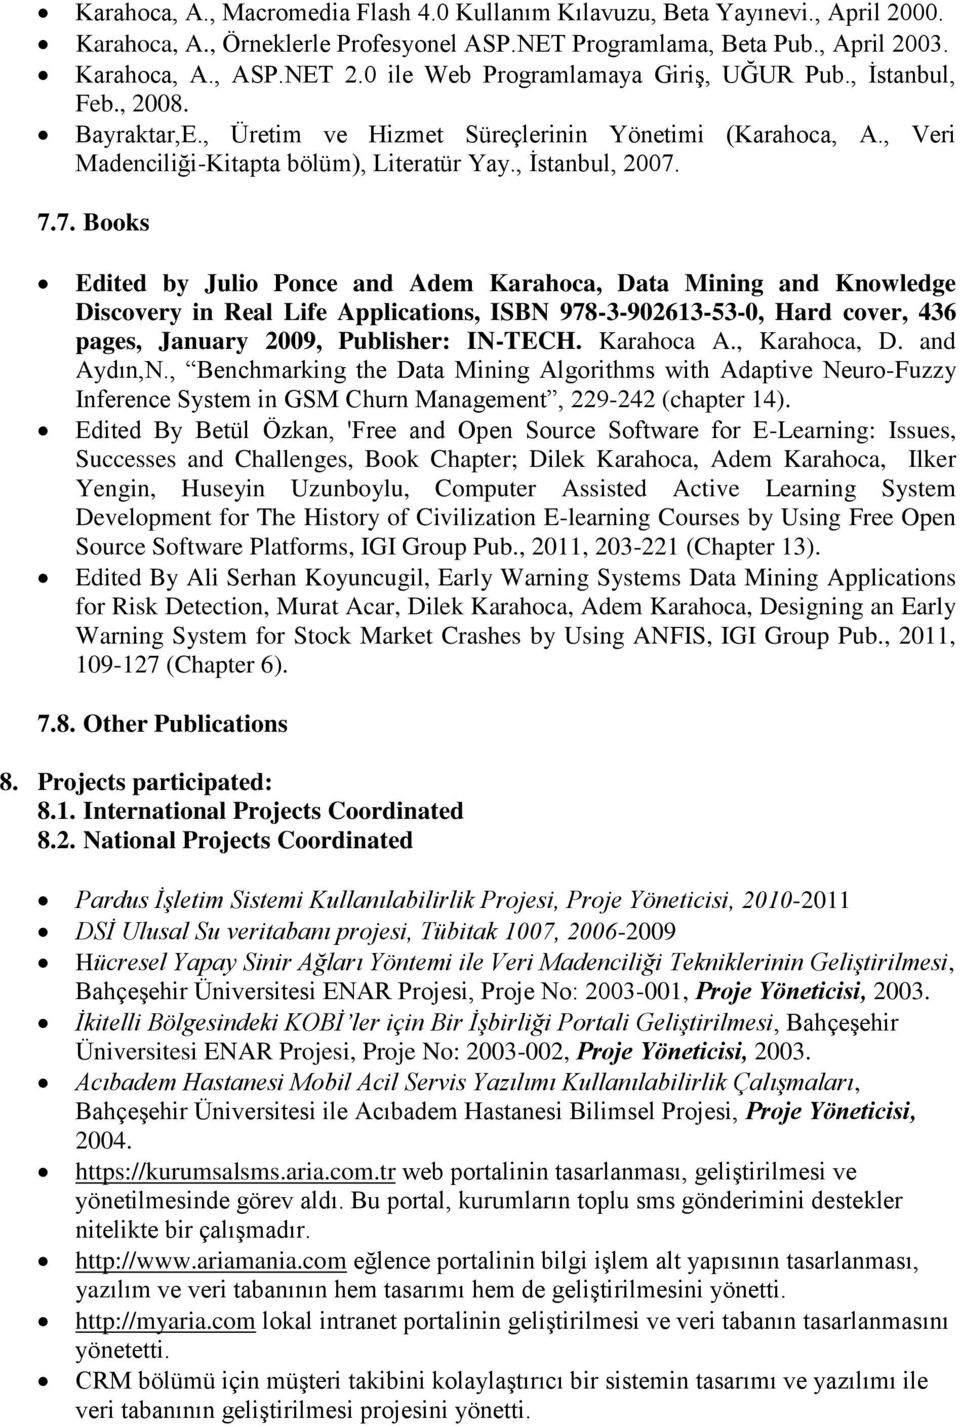 7. Books Edited by Julio Ponce and Adem Karahoca, Data Mining and Knowledge Discovery in Real Life Applications, ISBN 978-3-902613-53-0, Hard cover, 436 pages, January 2009, Publisher: IN-TECH.